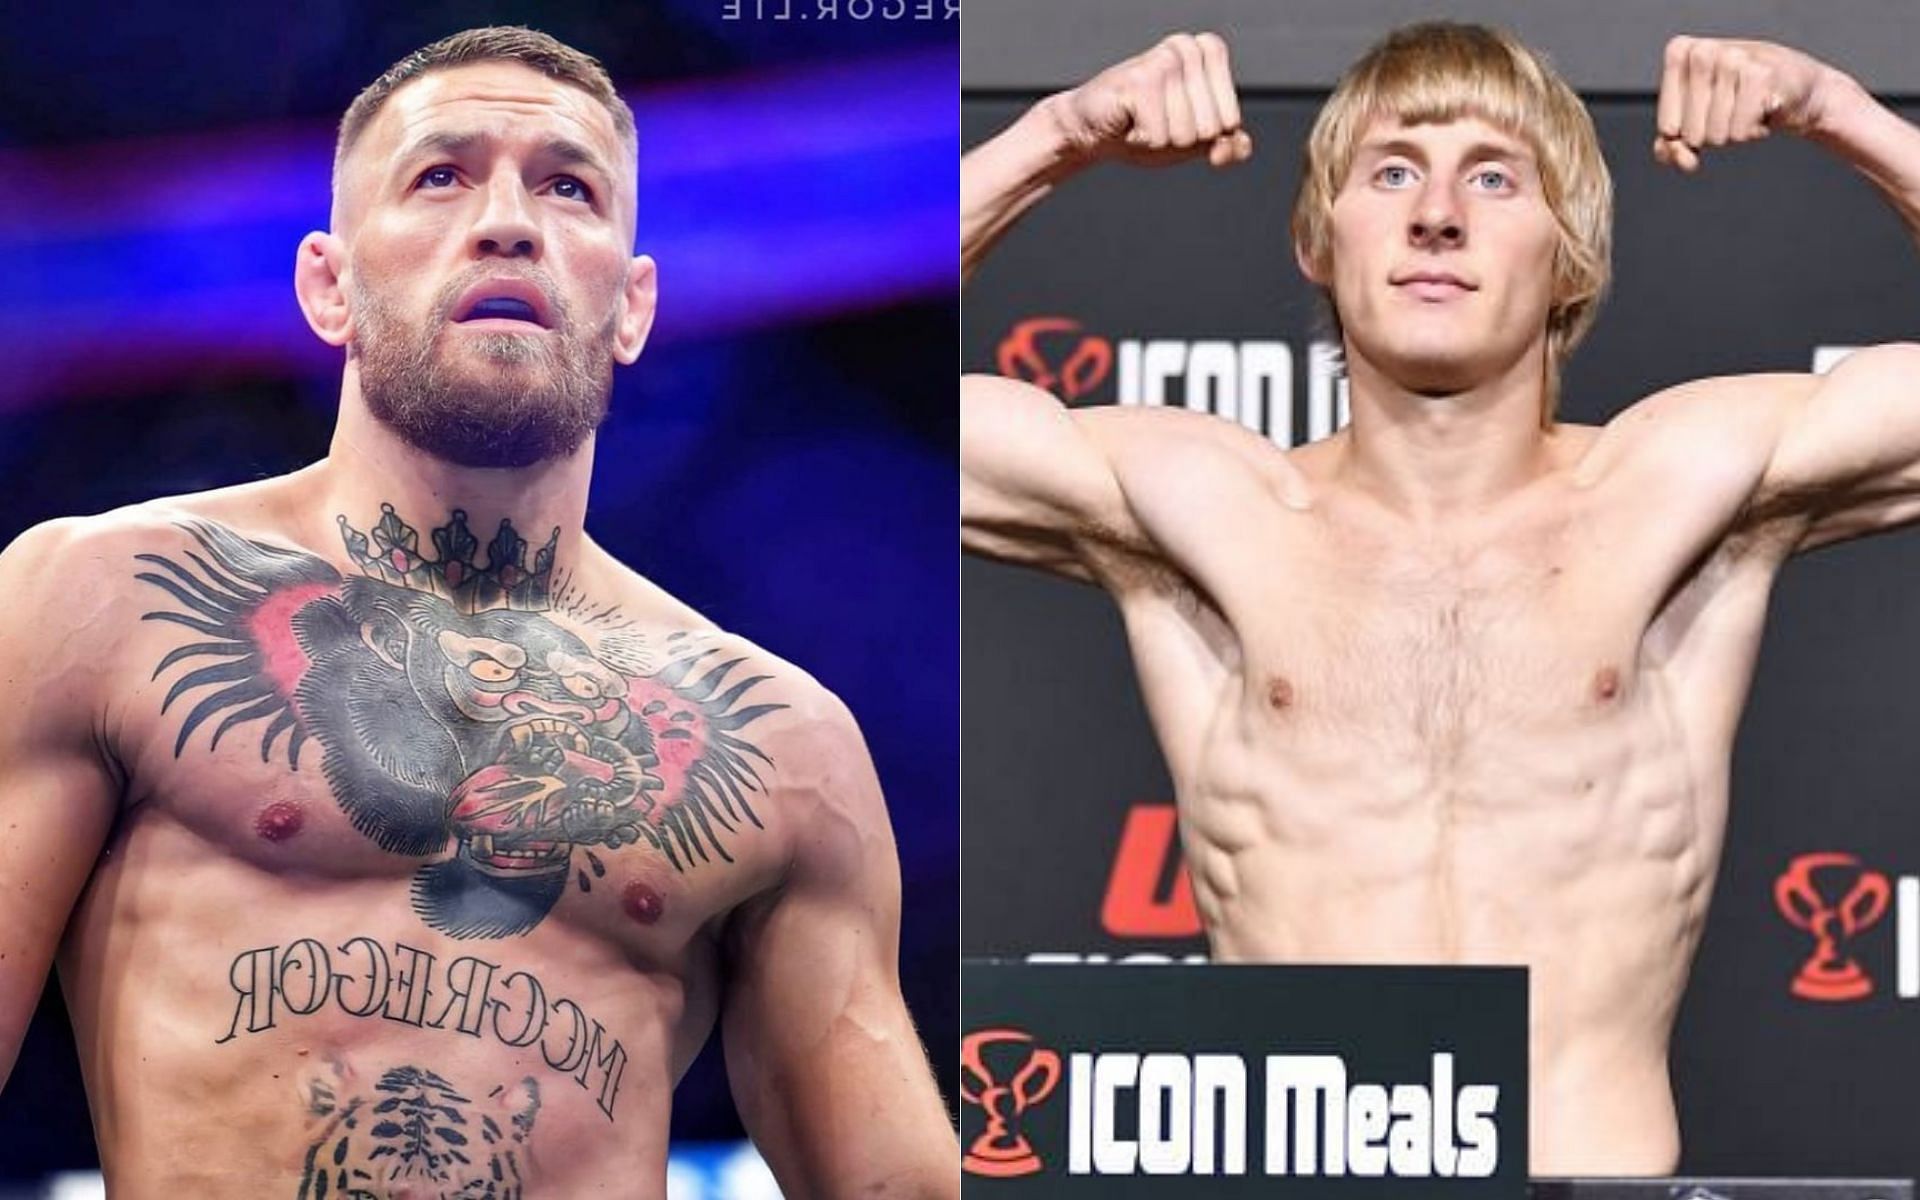 Conor McGregor (left) and Paddy Pimblett (right) [Image credits: @thenotoriousmma on Instagram]